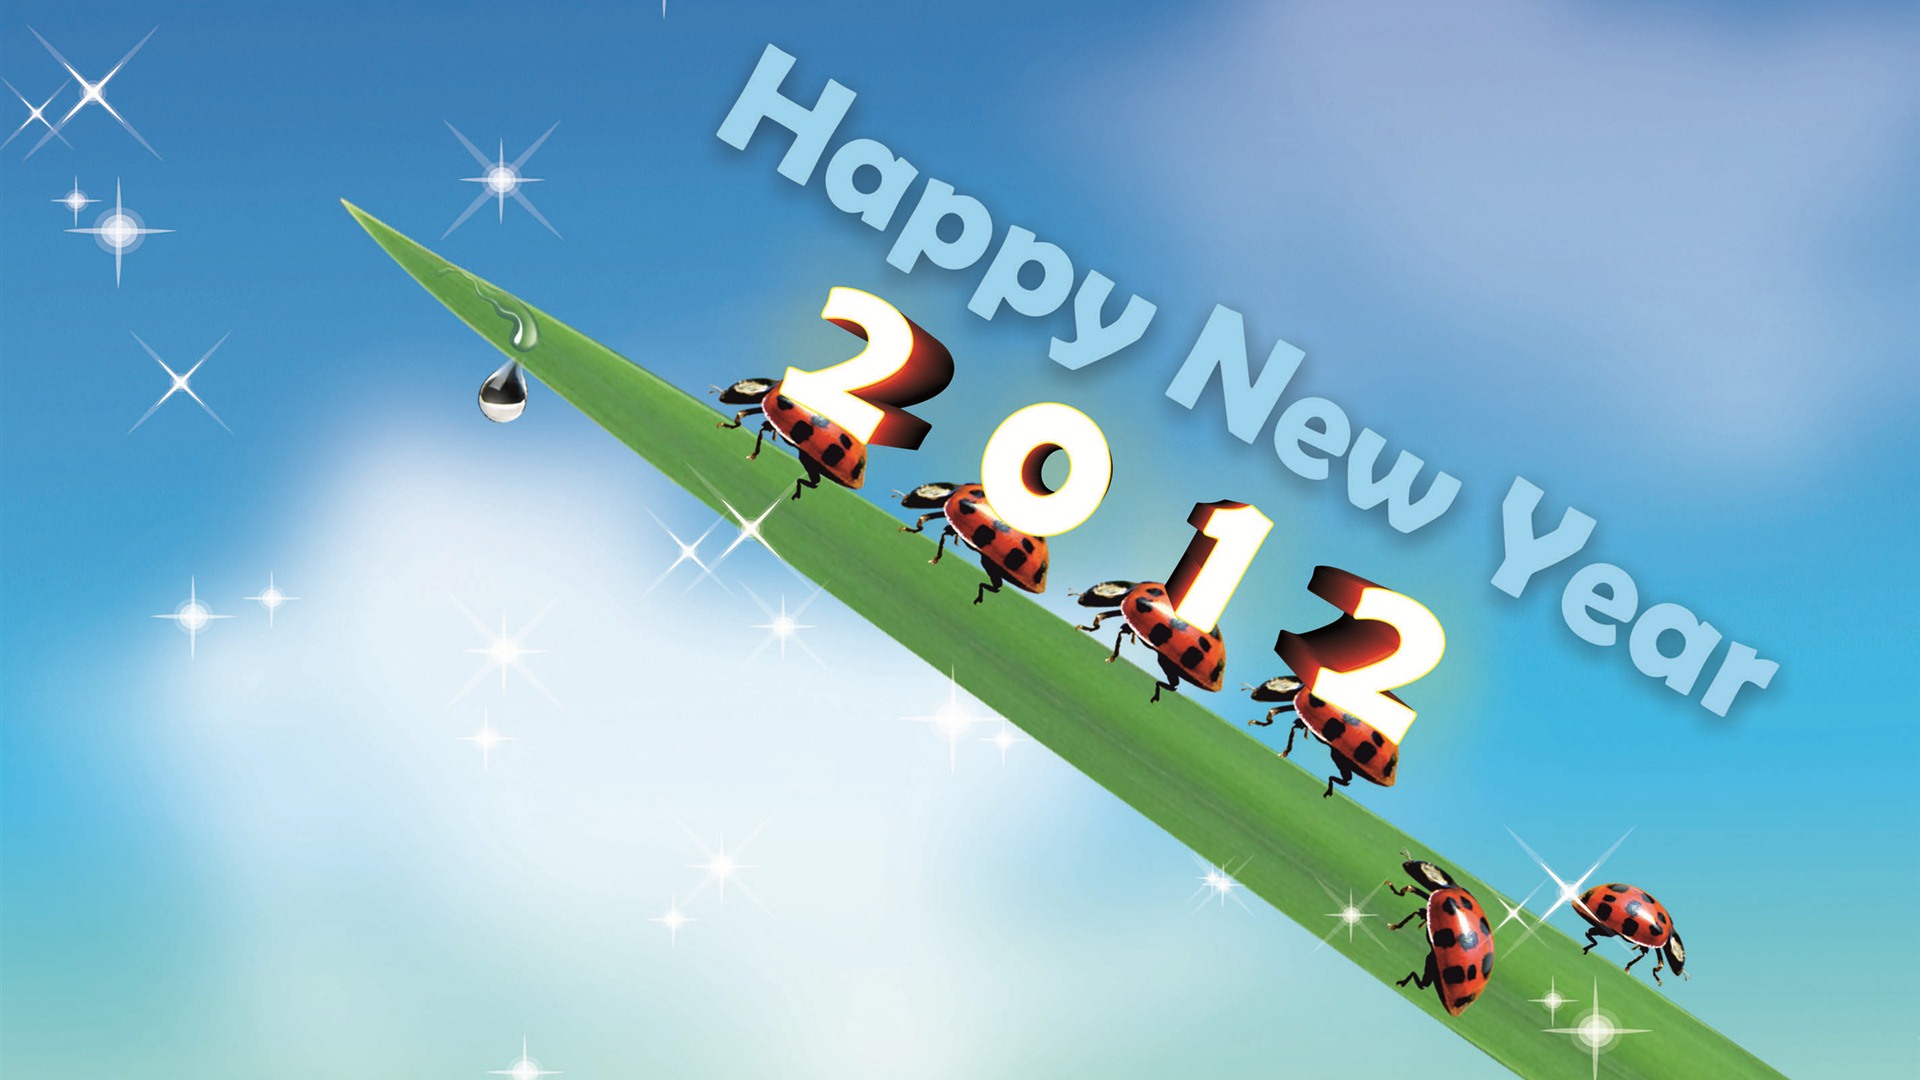 2012 New Year wallpapers (2) #8 - 1920x1080